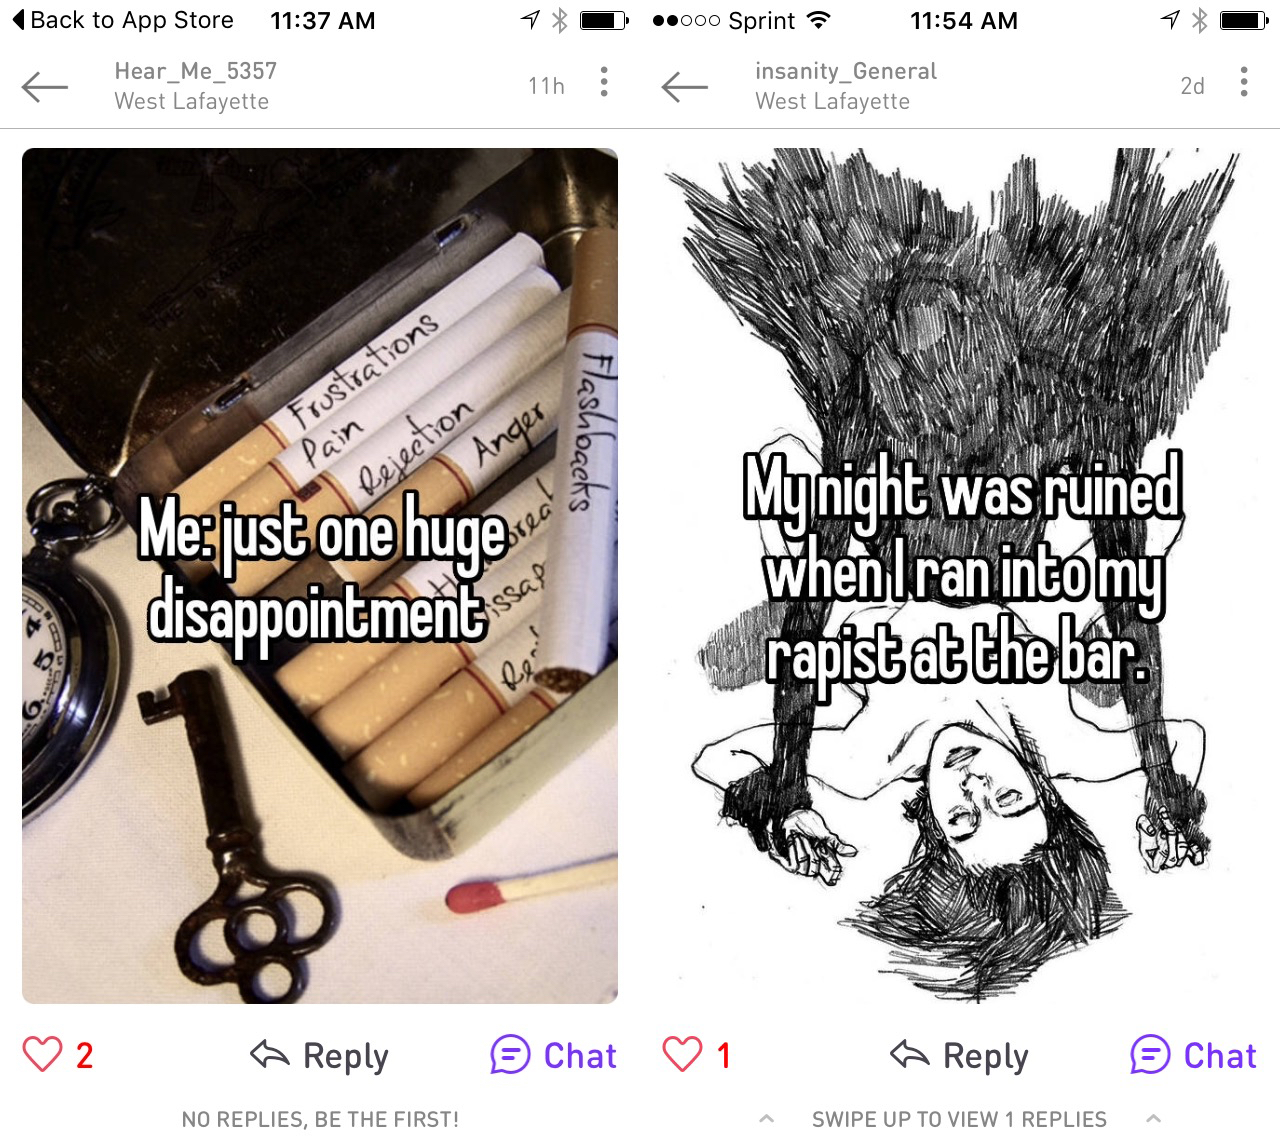 Screenshot of Whisper feed, Spring 2016. Messages read, 'Me: just one huge disappointment' and 'My night was ruined when I ran into my rapist at the bar.'